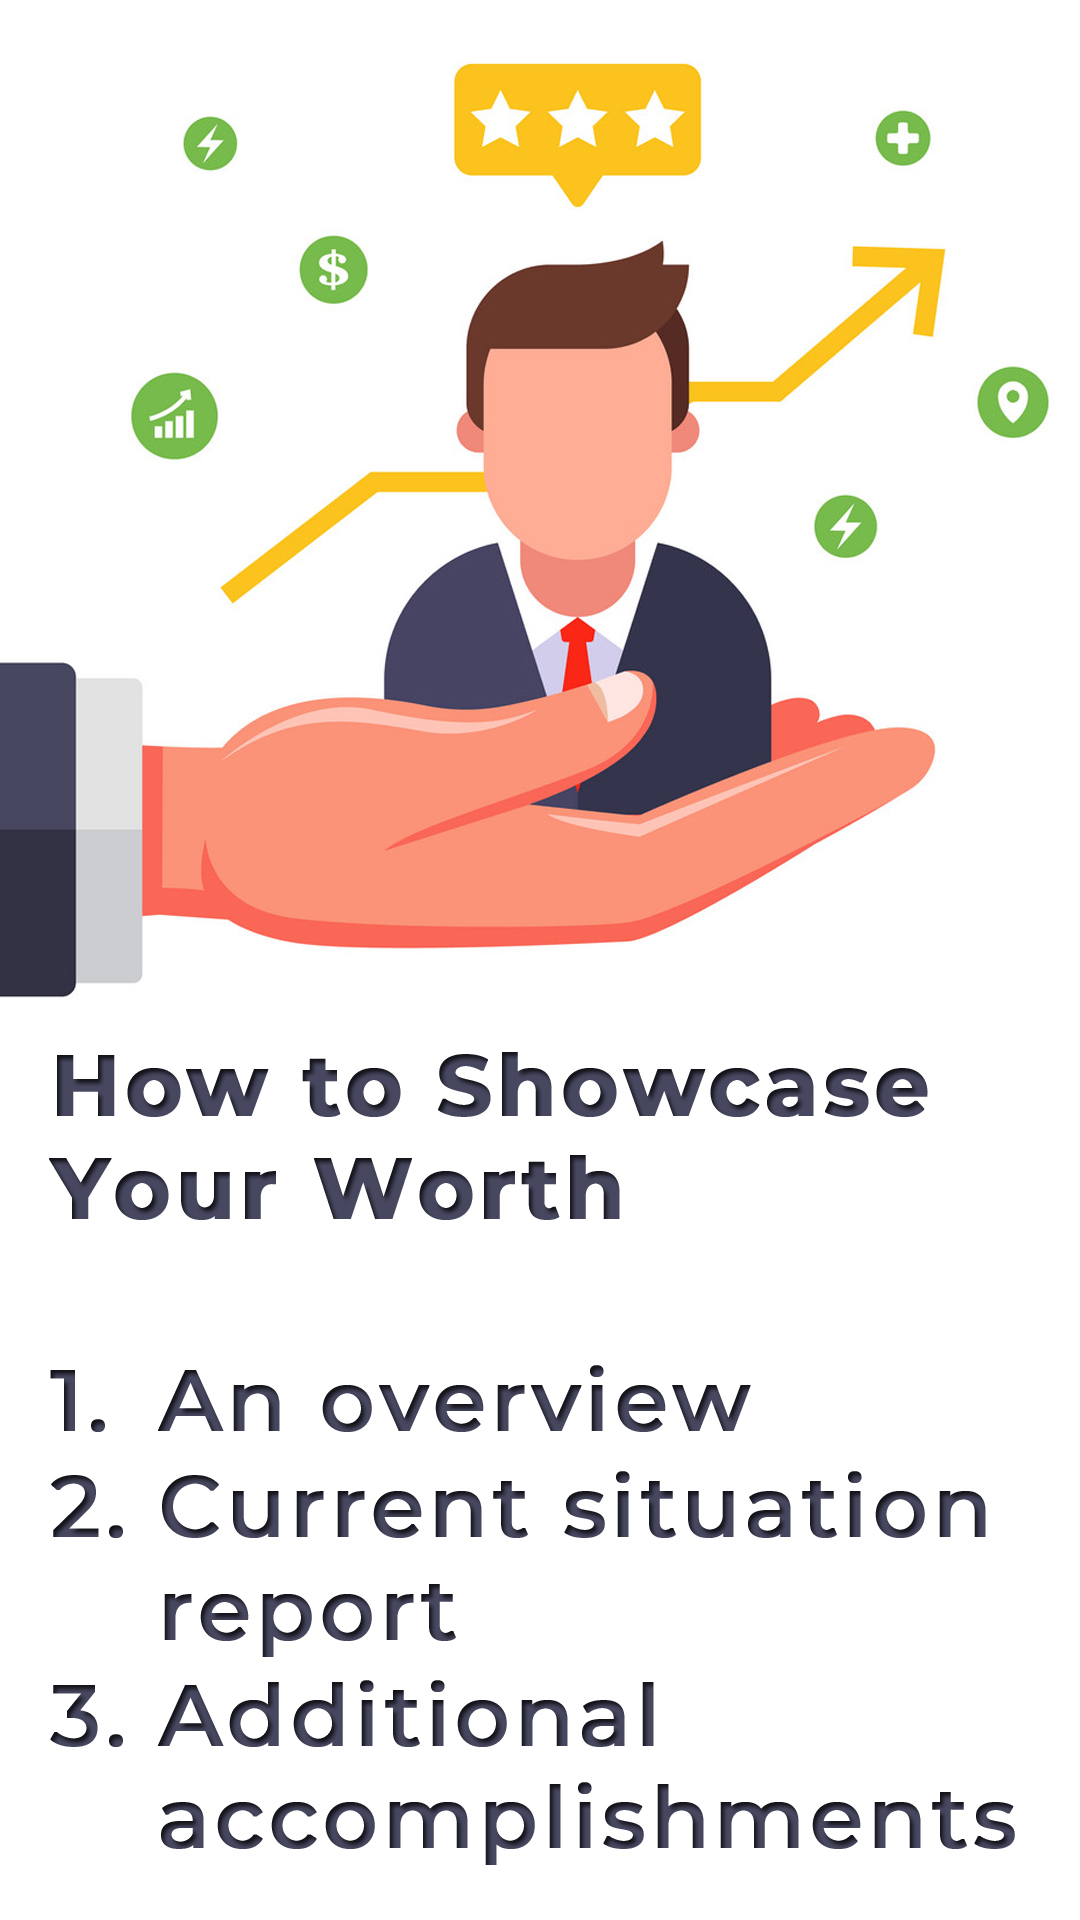 How to Showcase Your Worth